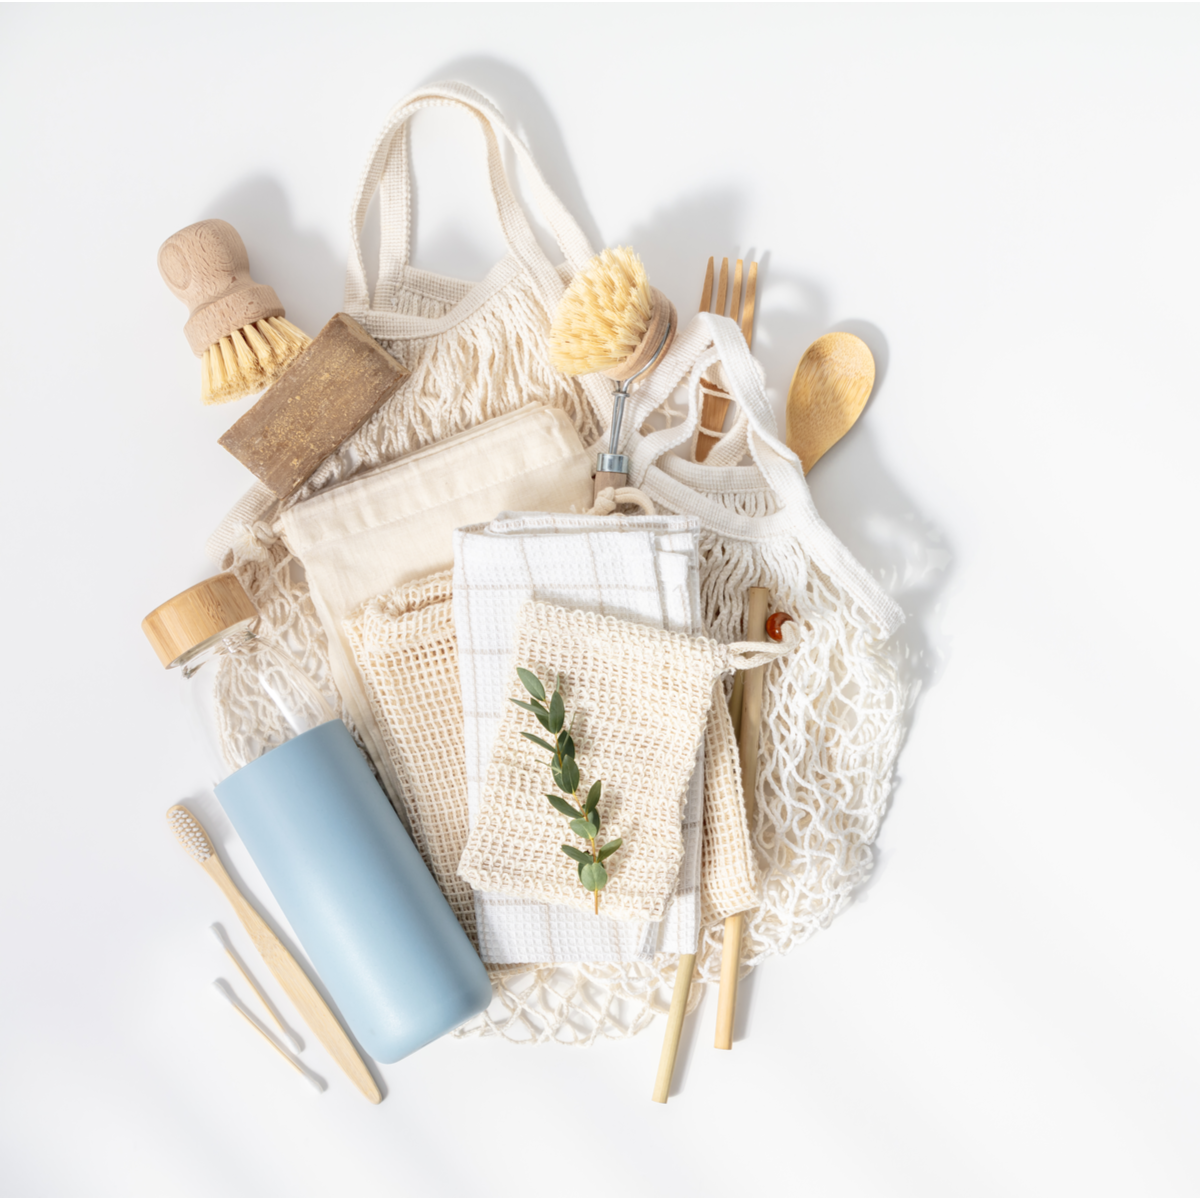 Various eco-friendly products in a pile, including cotton and muslin soap and grocery bags, sisal scrubbing brush and a reusable blue drinking mug